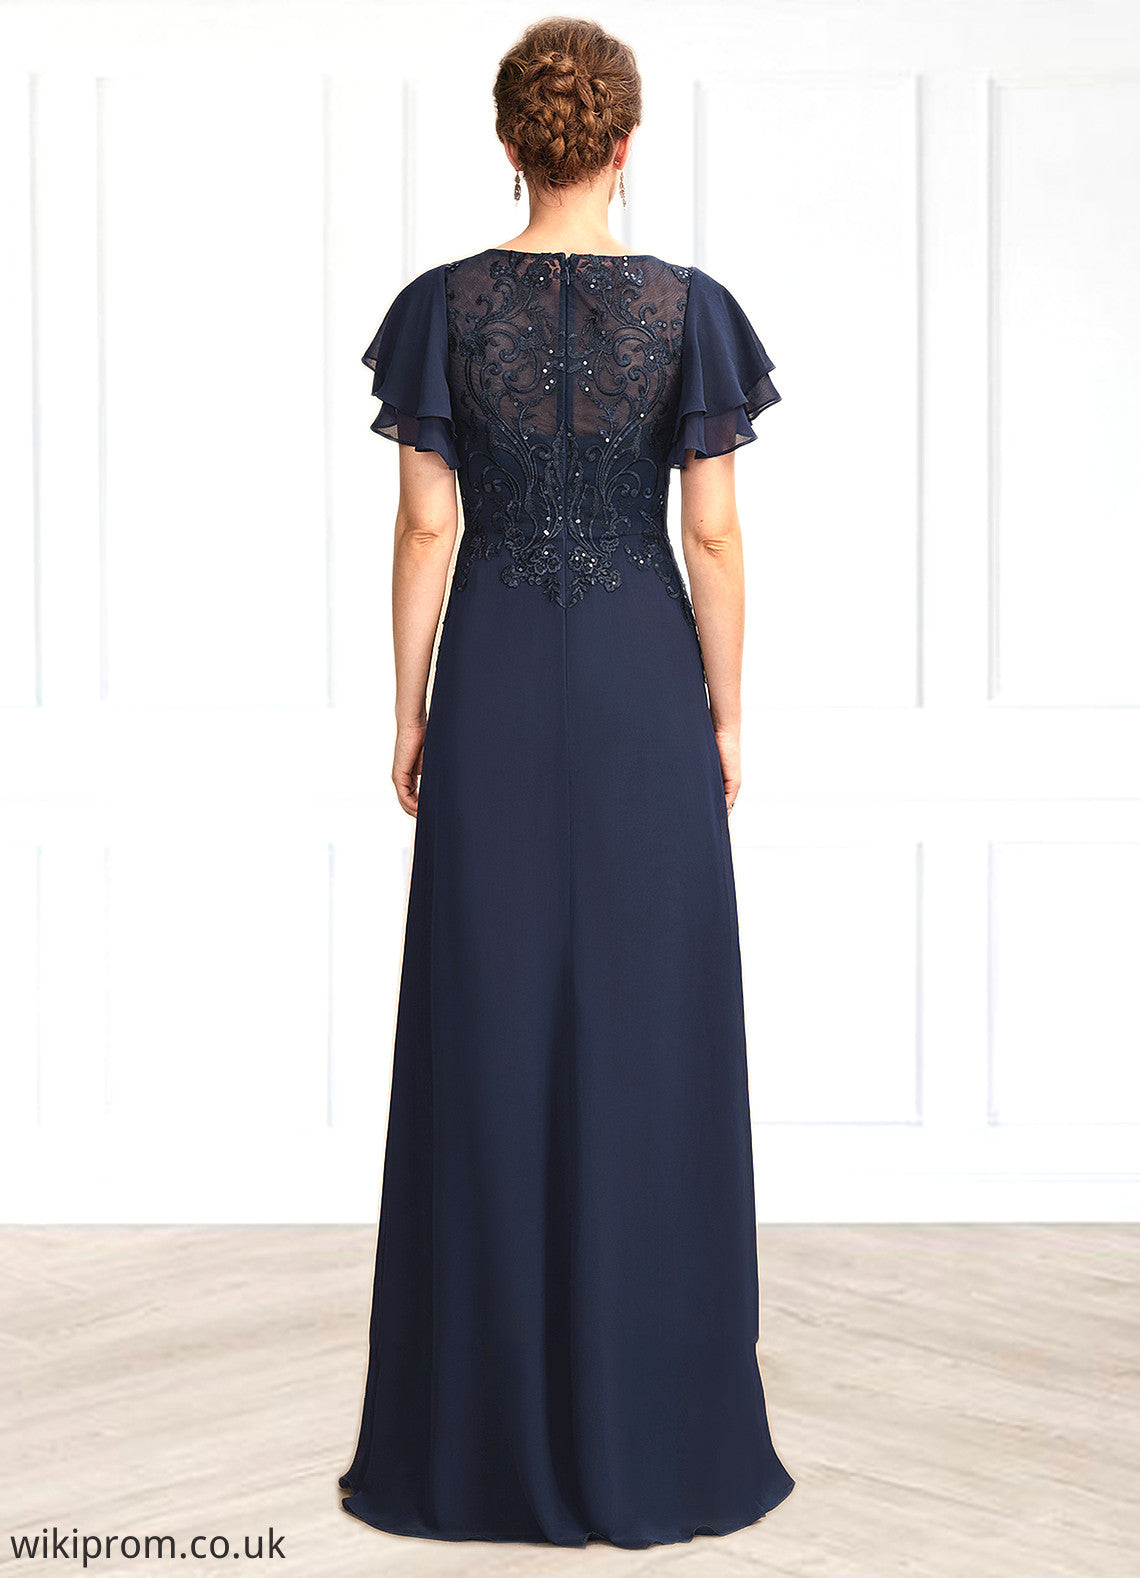 Christina A-Line Scoop Neck Floor-Length Chiffon Lace Mother of the Bride Dress With Sequins SWK126P0014857